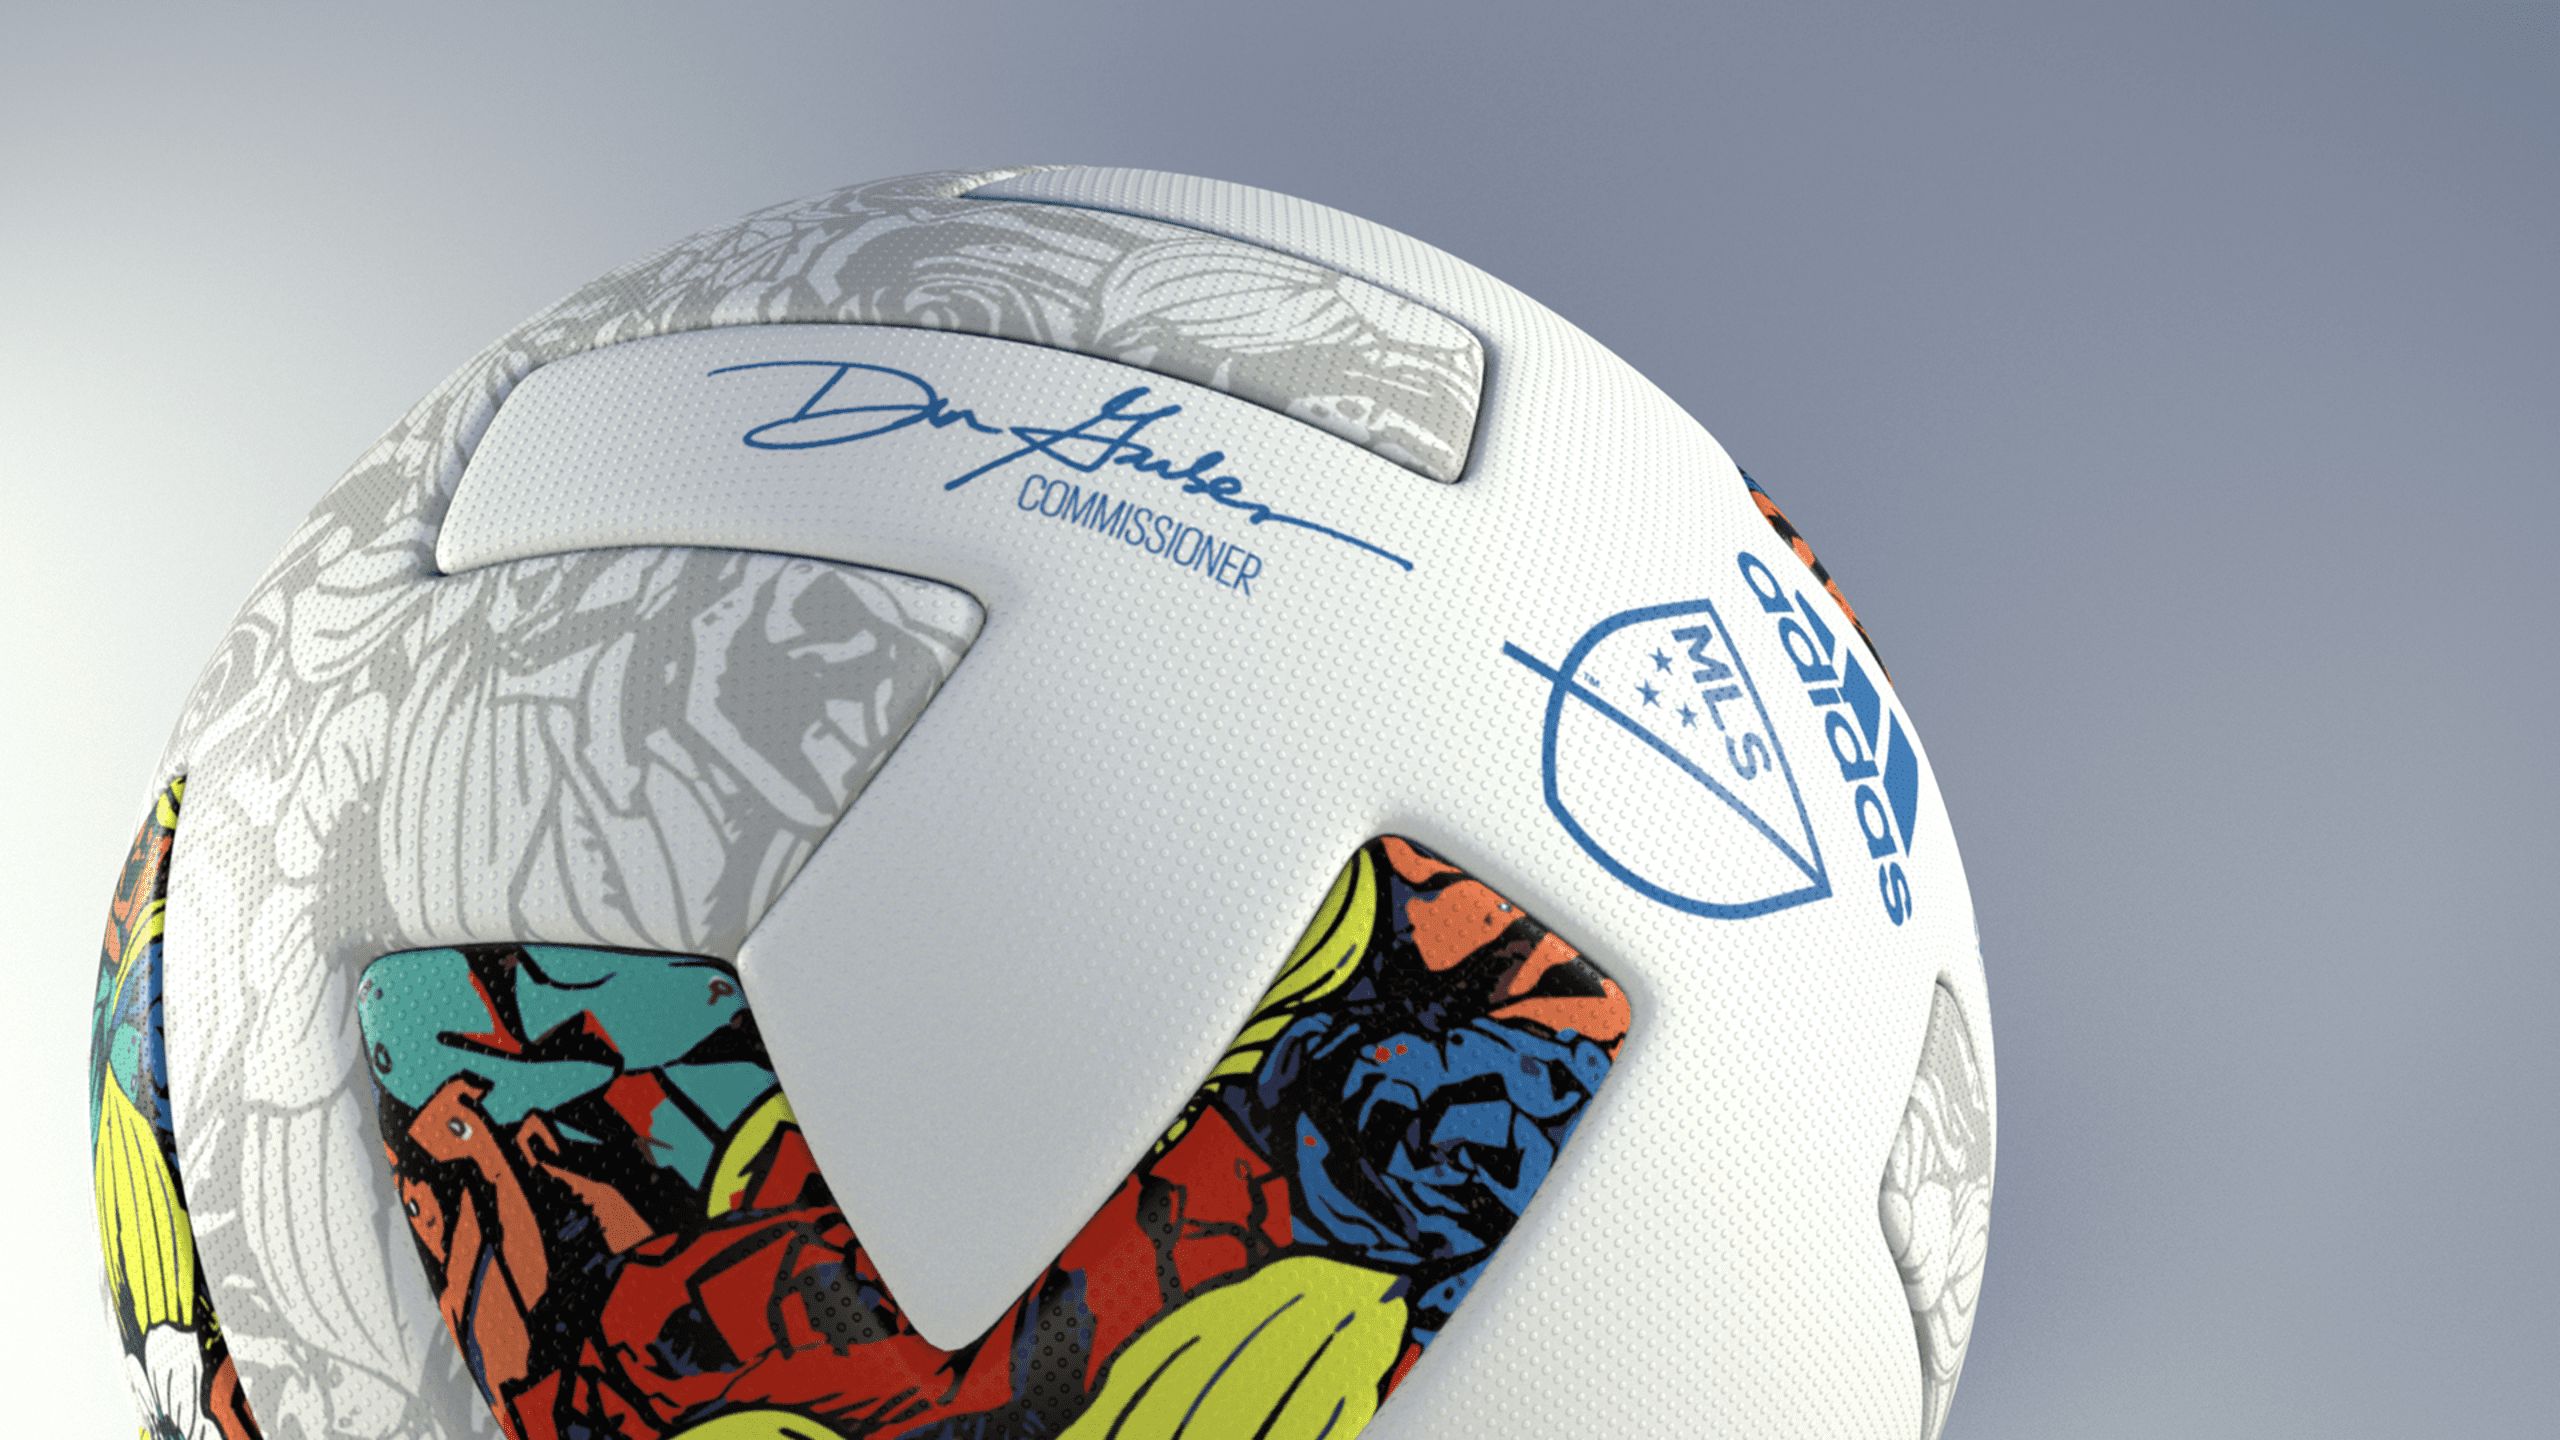 You are viewing the image with filename adidas_2022_mls_match_ball_1.jpg.